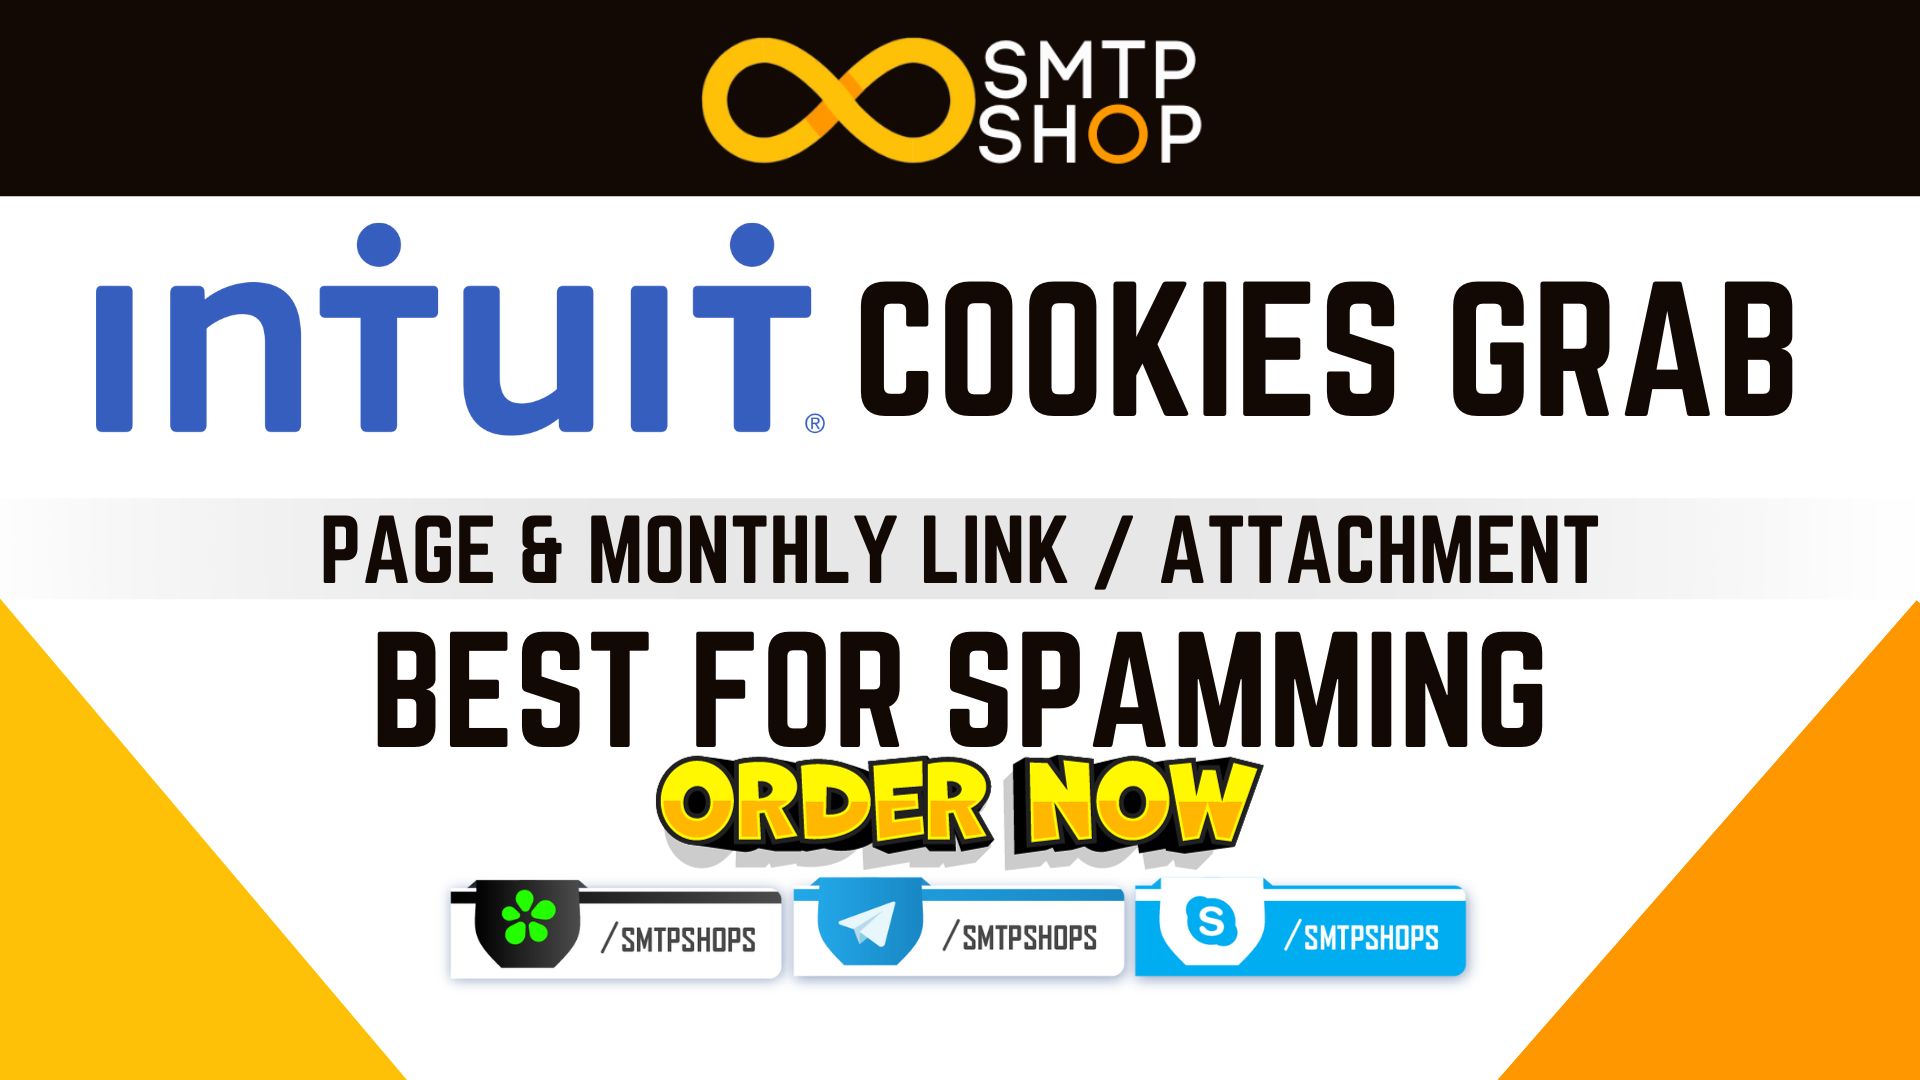 Intuit Auto Cookies Grab Page